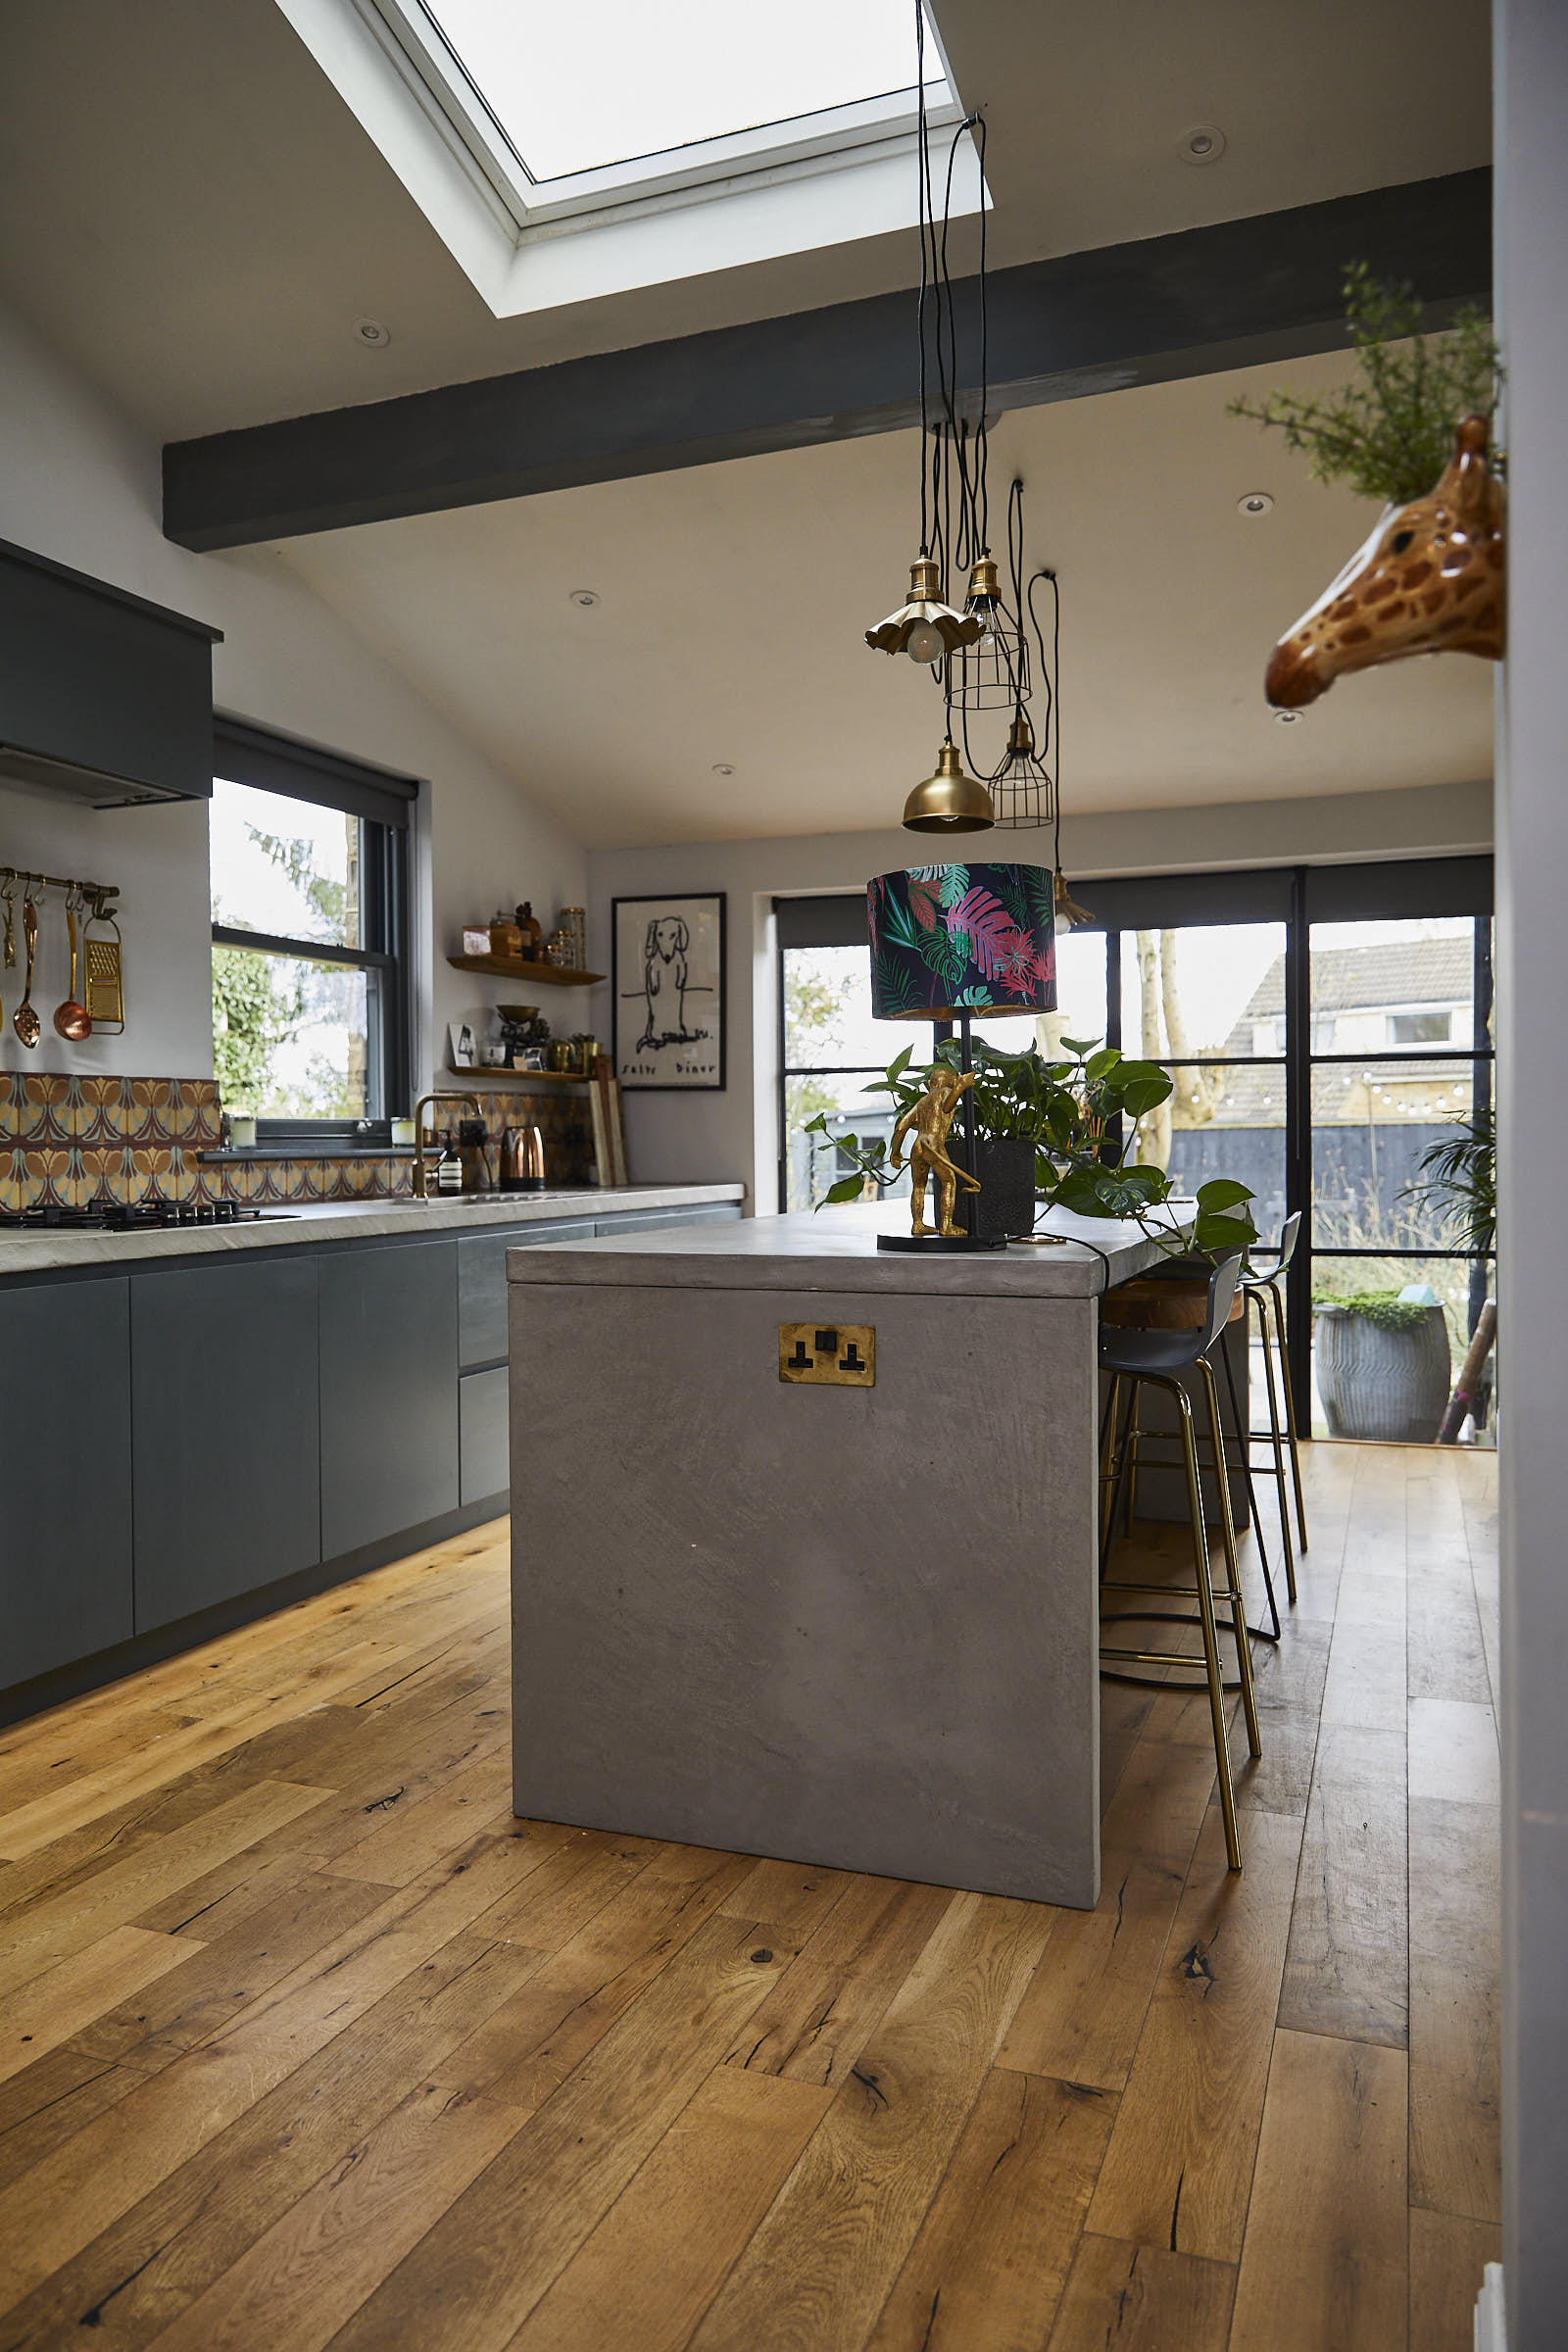 Solid concrete grey kitchen island with pendant lights above with geometric metal shades